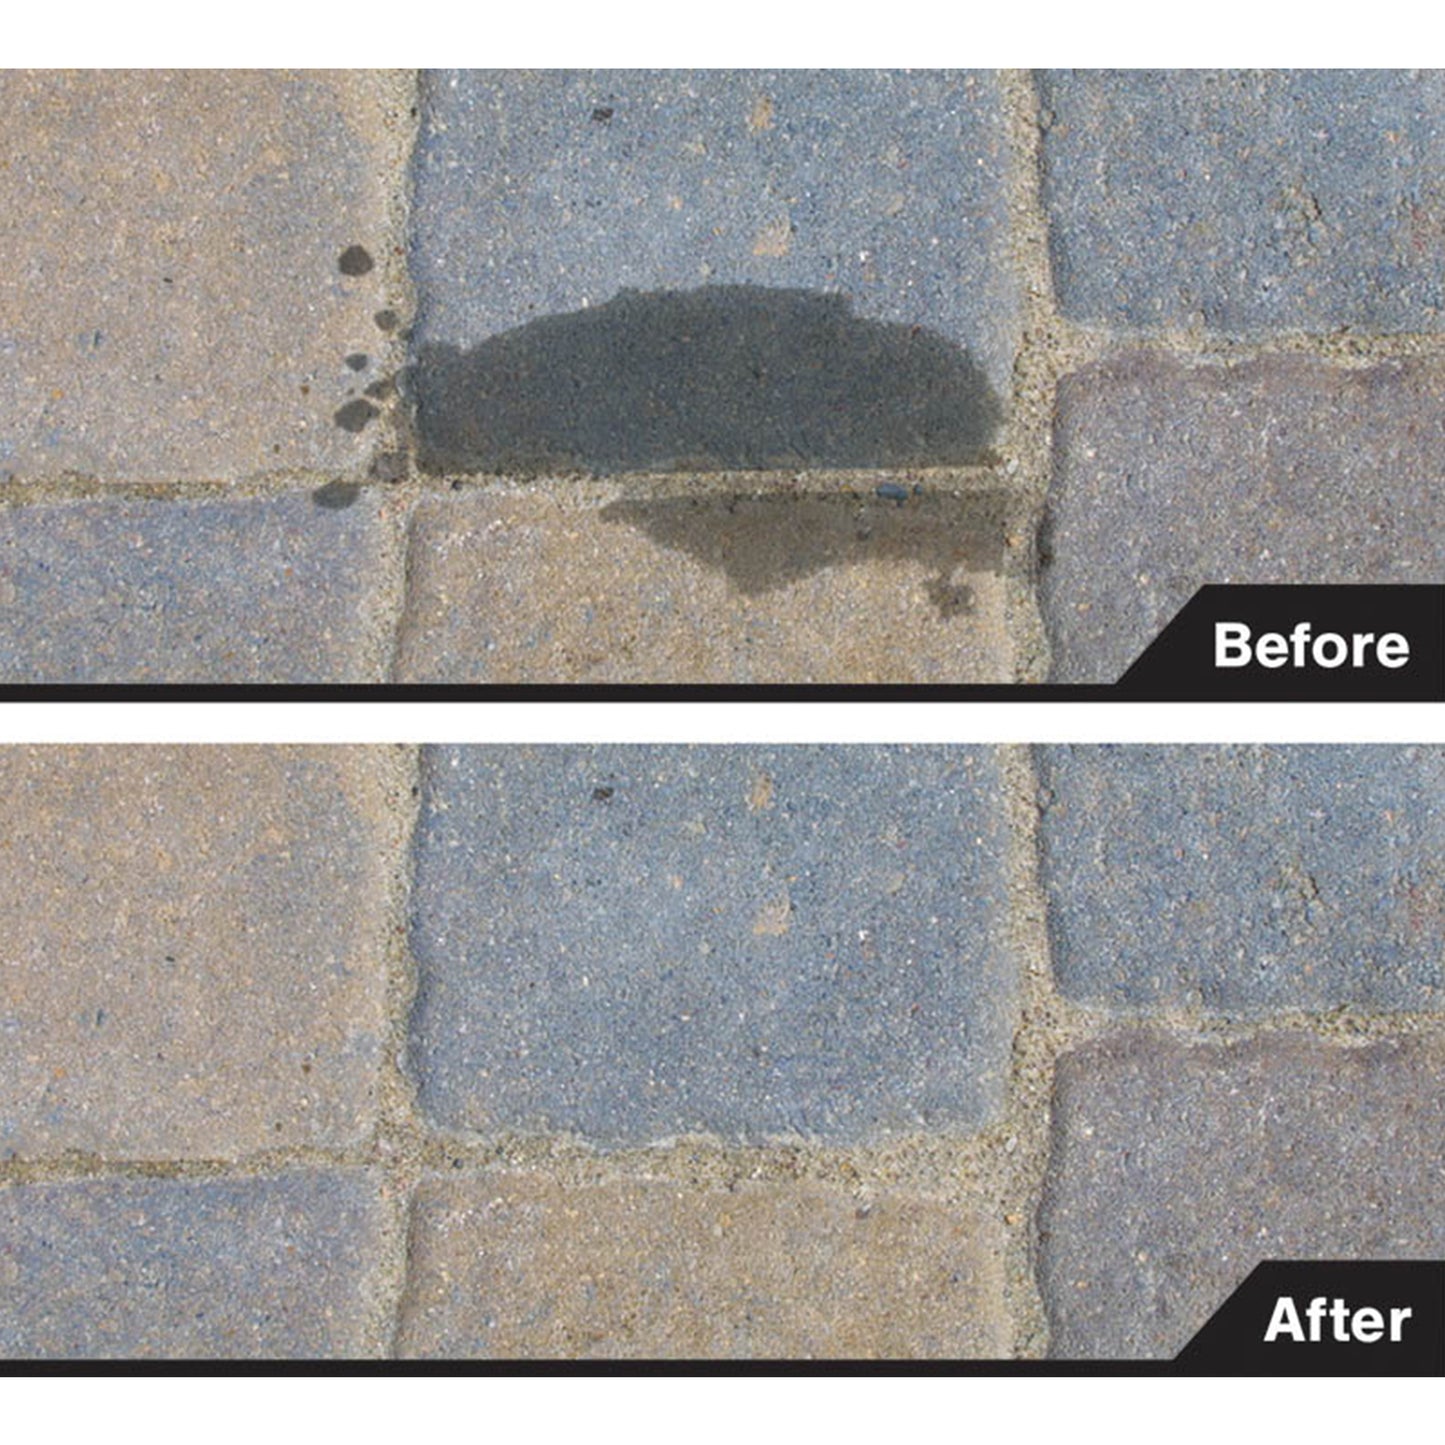 SRW Products CDX Cleaner & Degreaser X-Treme before & after picturea